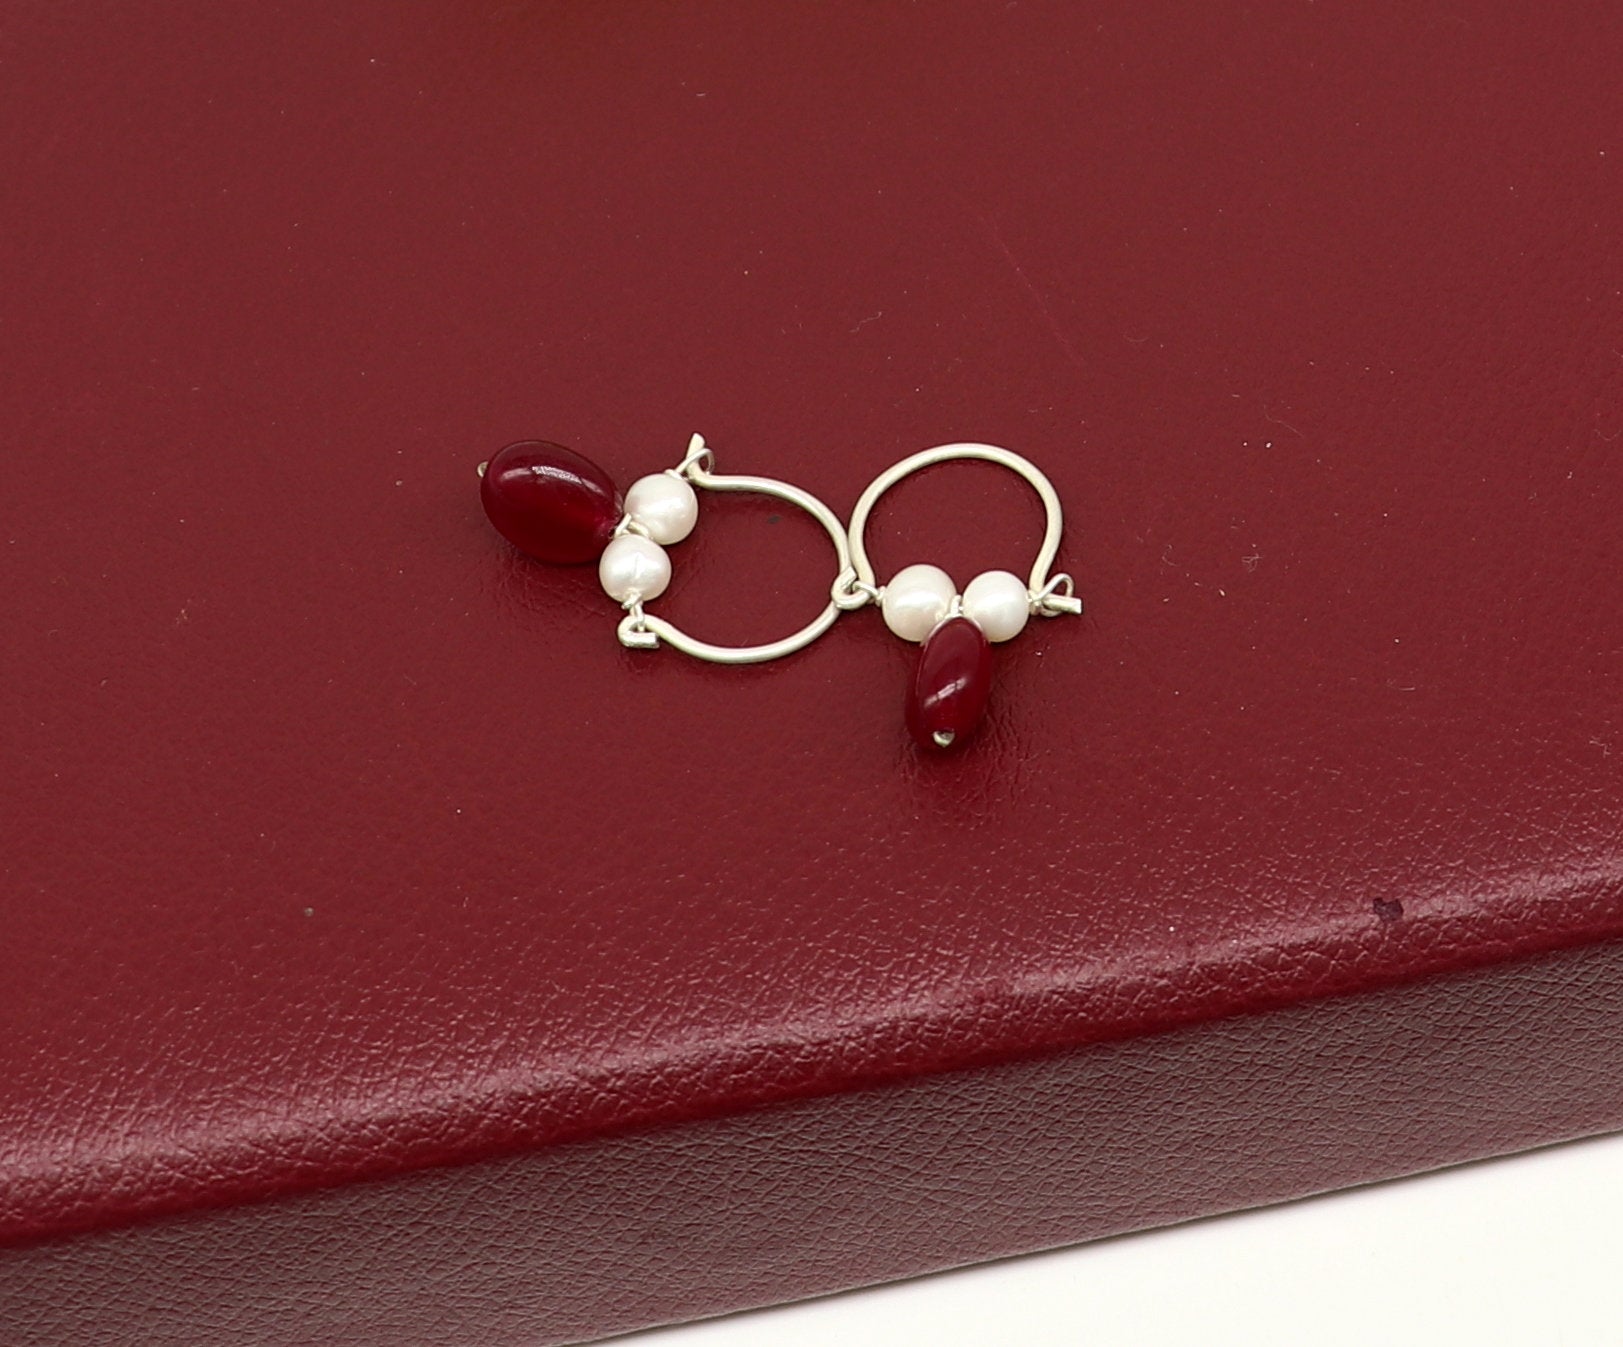 925 sterling silver custom made hoops earring, gorgeous hanging pearls drops hoops earring, stunning brides gifting jewelry s910 - TRIBAL ORNAMENTS